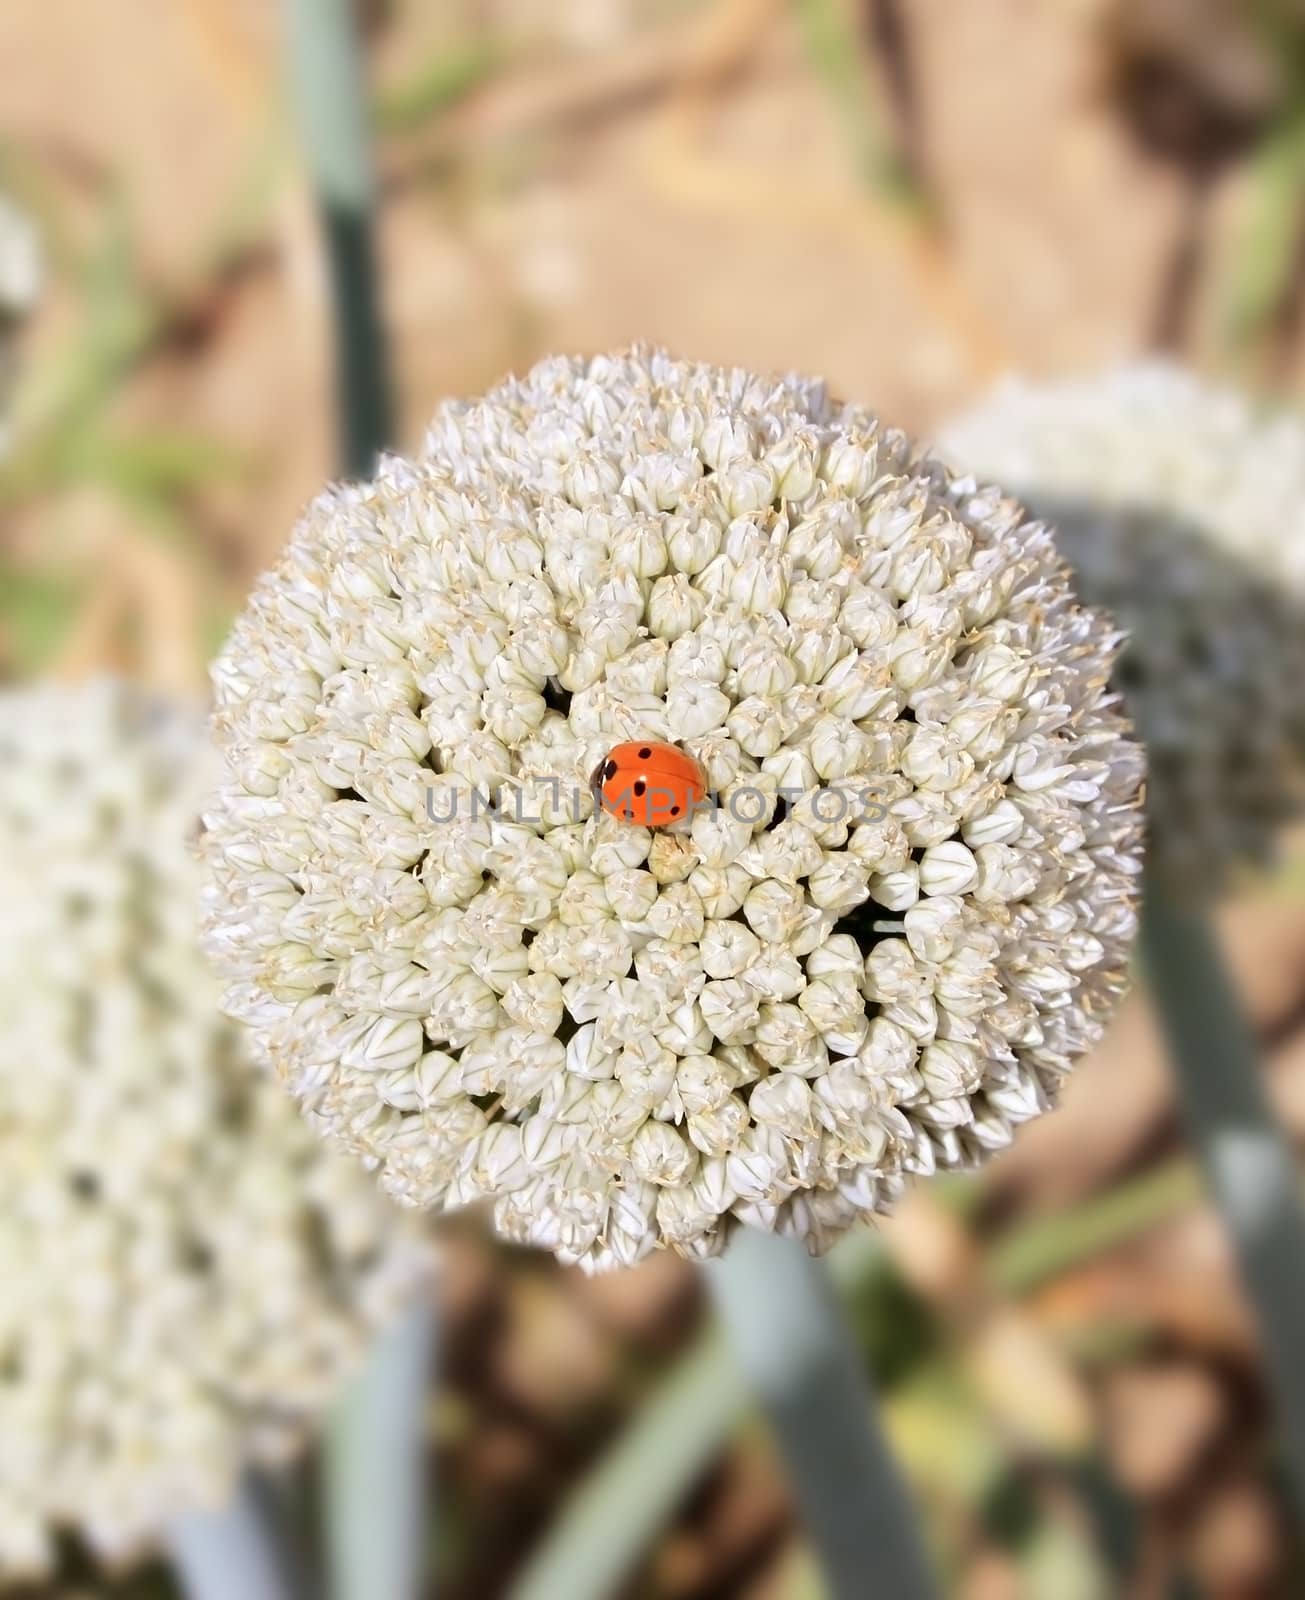 a ladybug on a flower close-up of onions